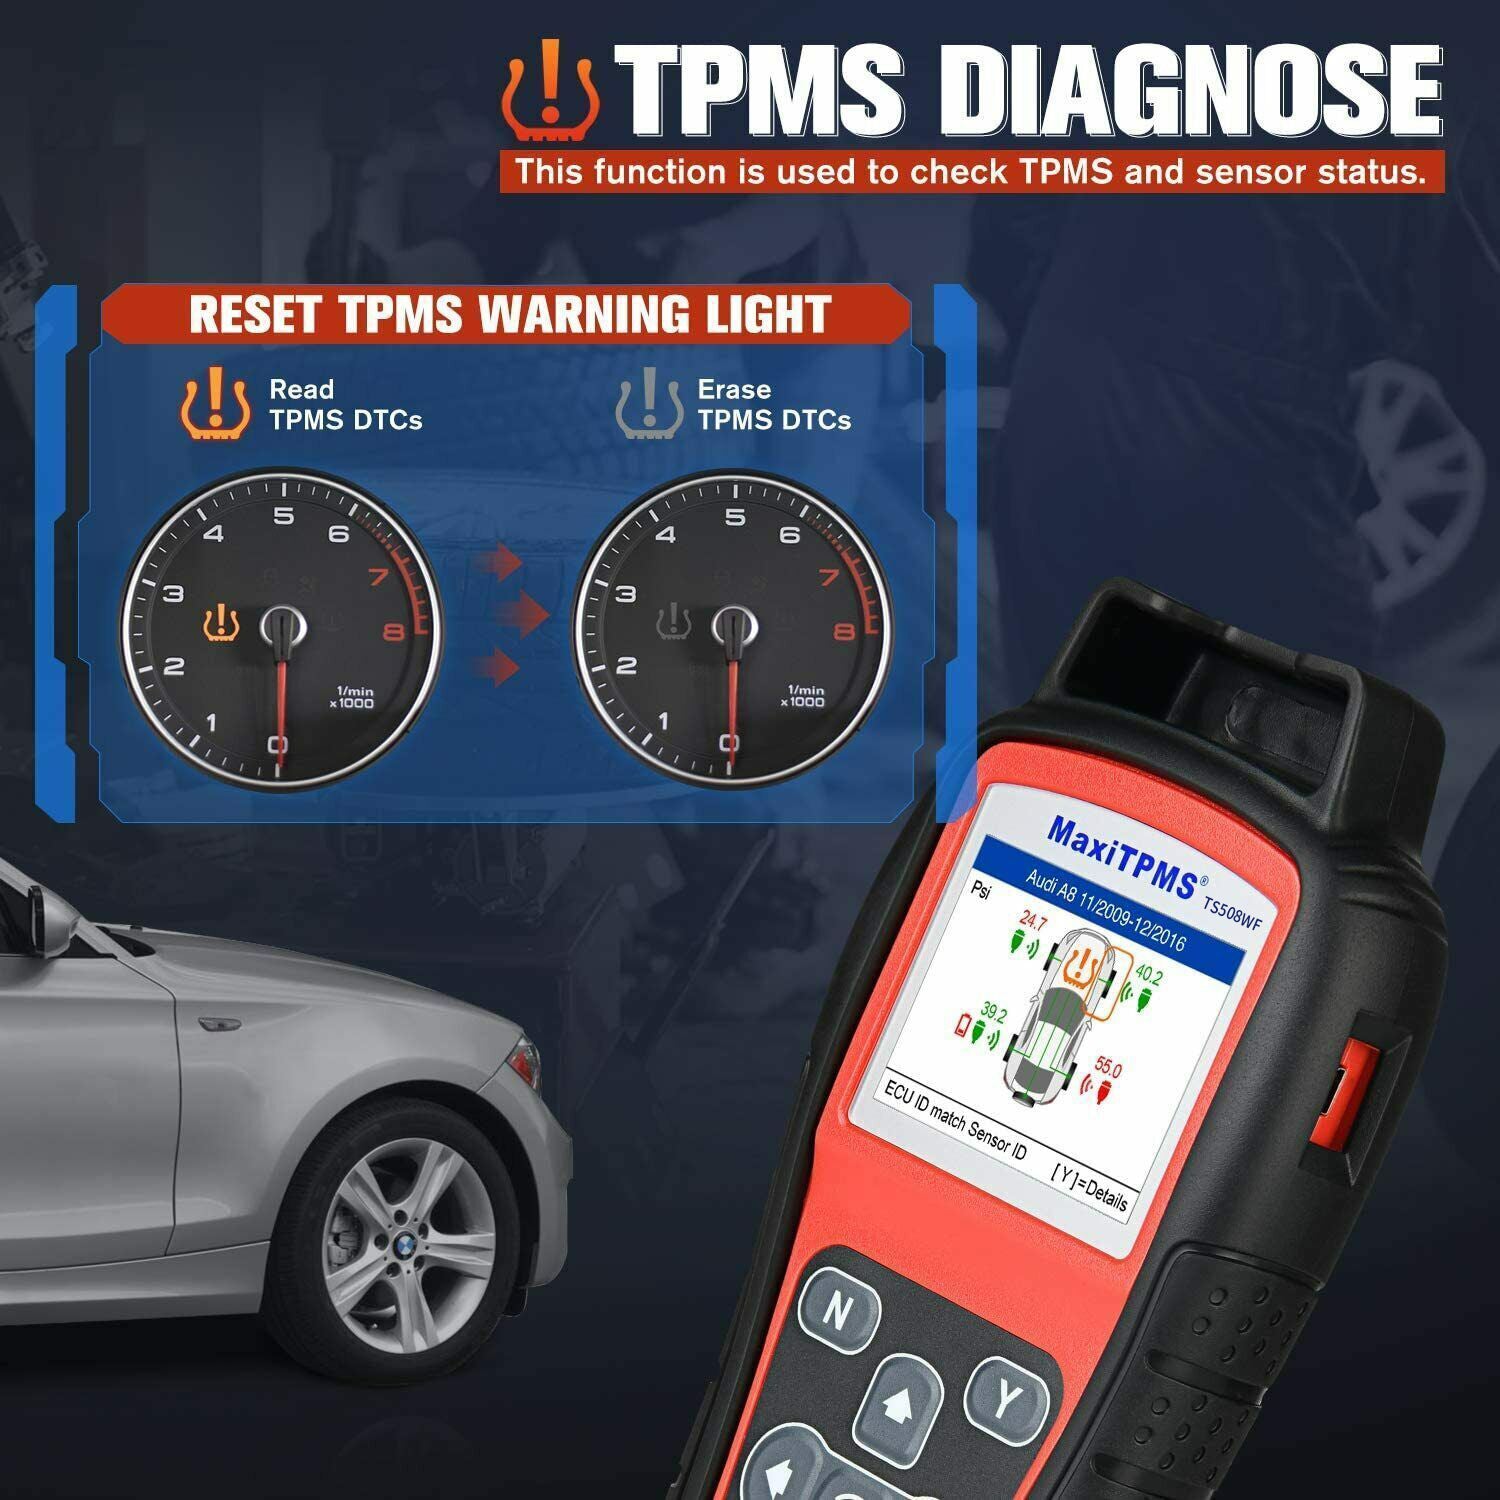 Autel MaxiTPMS TS508WF TPMS Tool Sensor Progarmming Relearn Activate TPMS Reset -2023 Newest All-In-One TPMS Tool